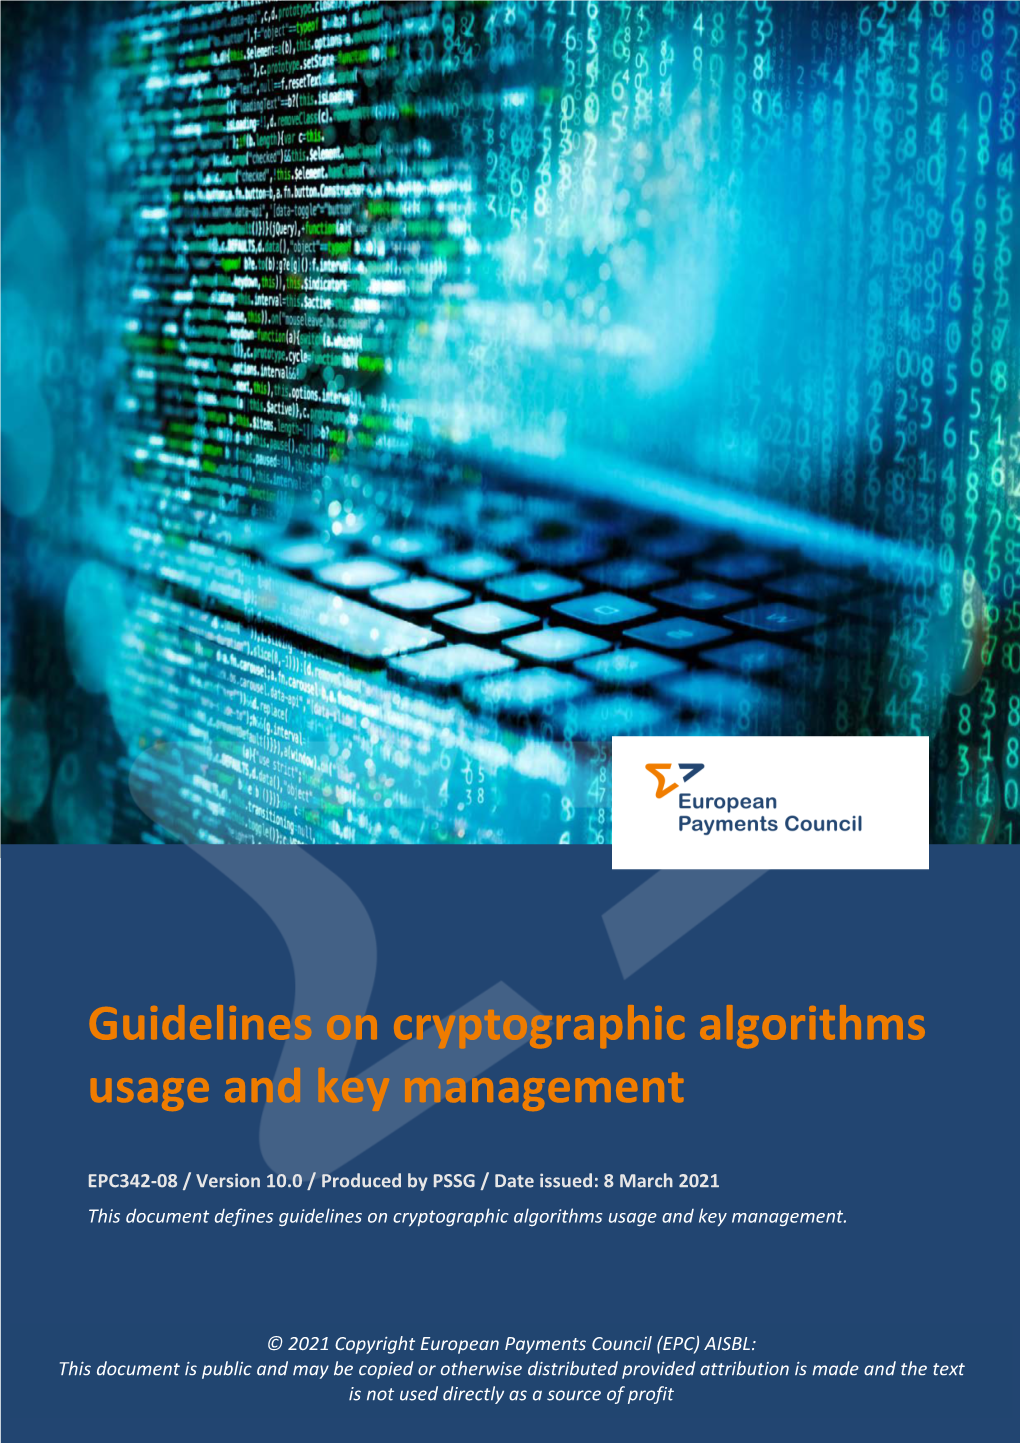 Guidelines on Cryptographic Algorithms Usage and Key Management